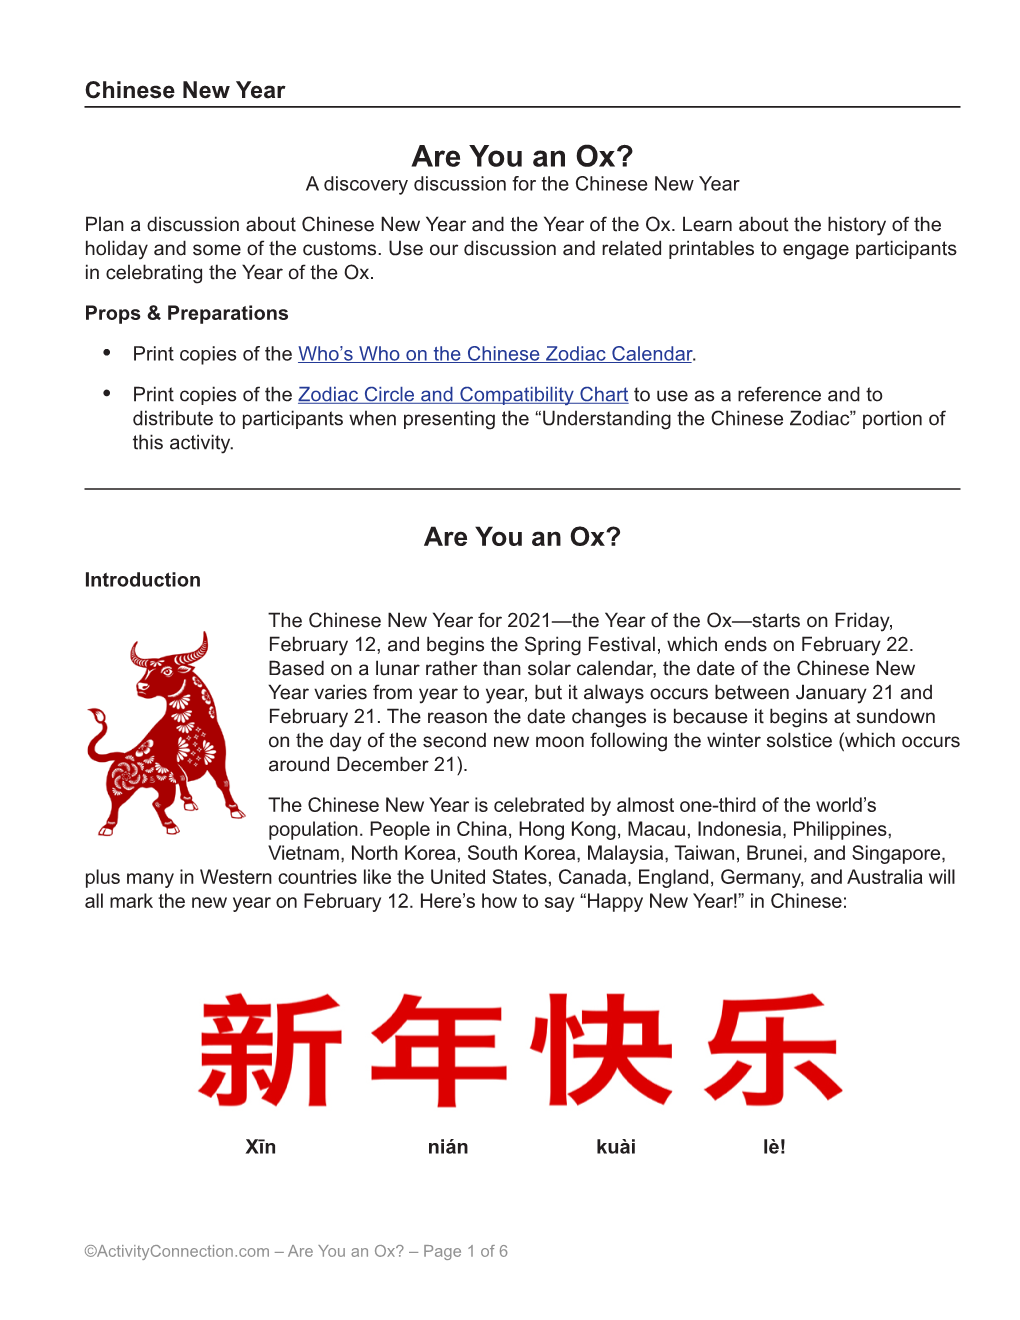 Are You an Ox? a Discovery Discussion for the Chinese New Year